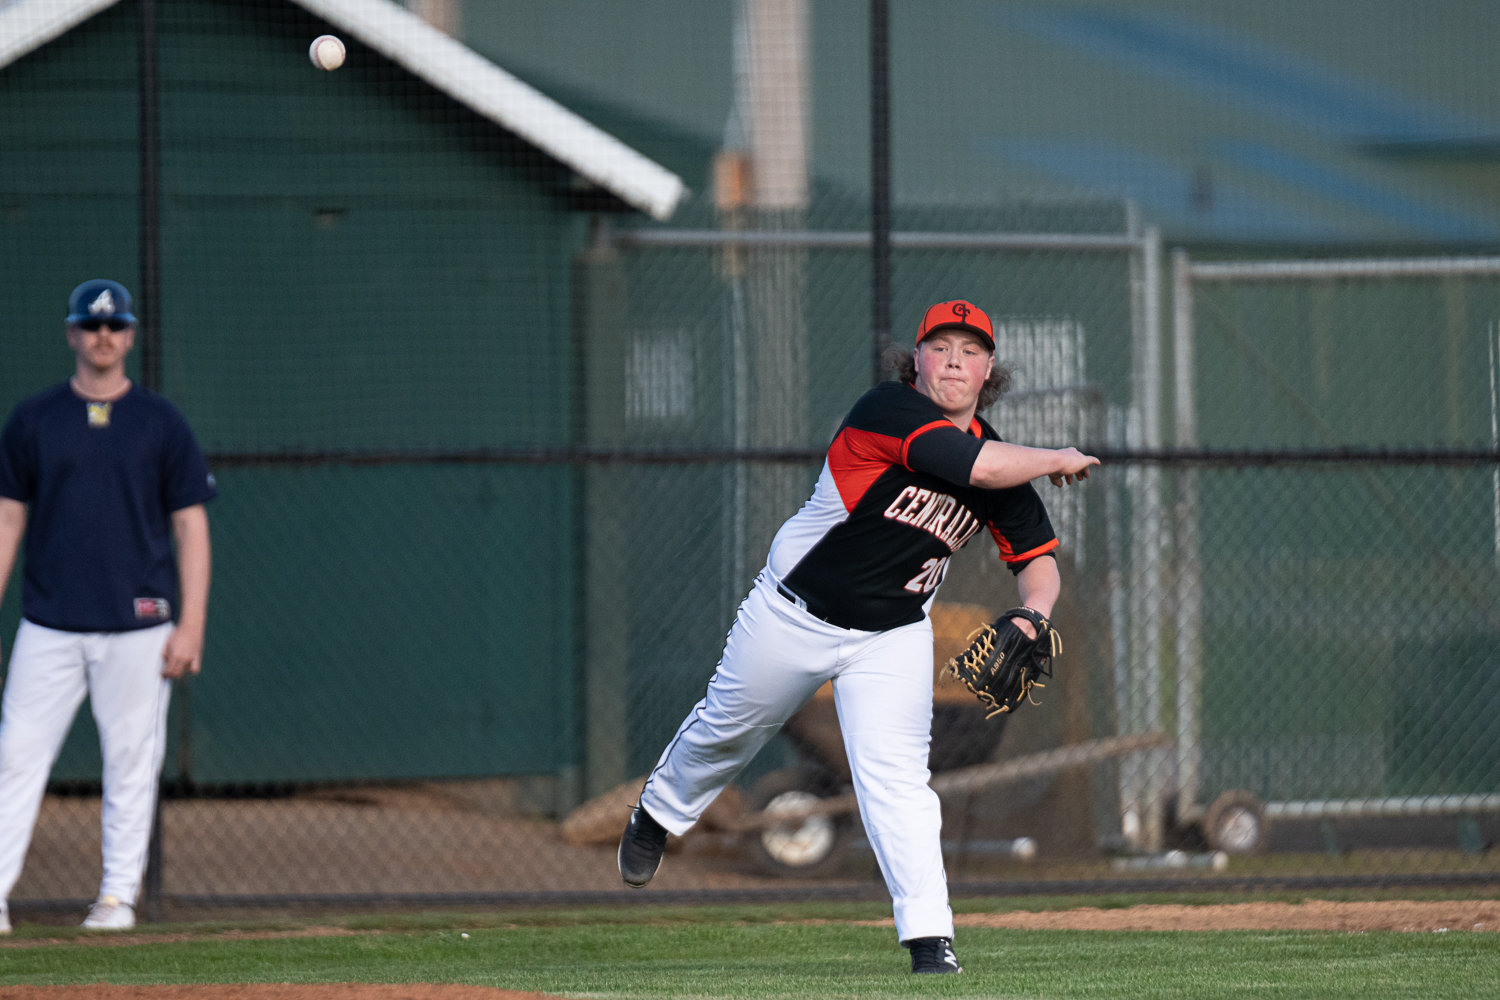 Marcus Miller throws across the diamond during Centralia's 14-13 win over Aberdeen on March 21.